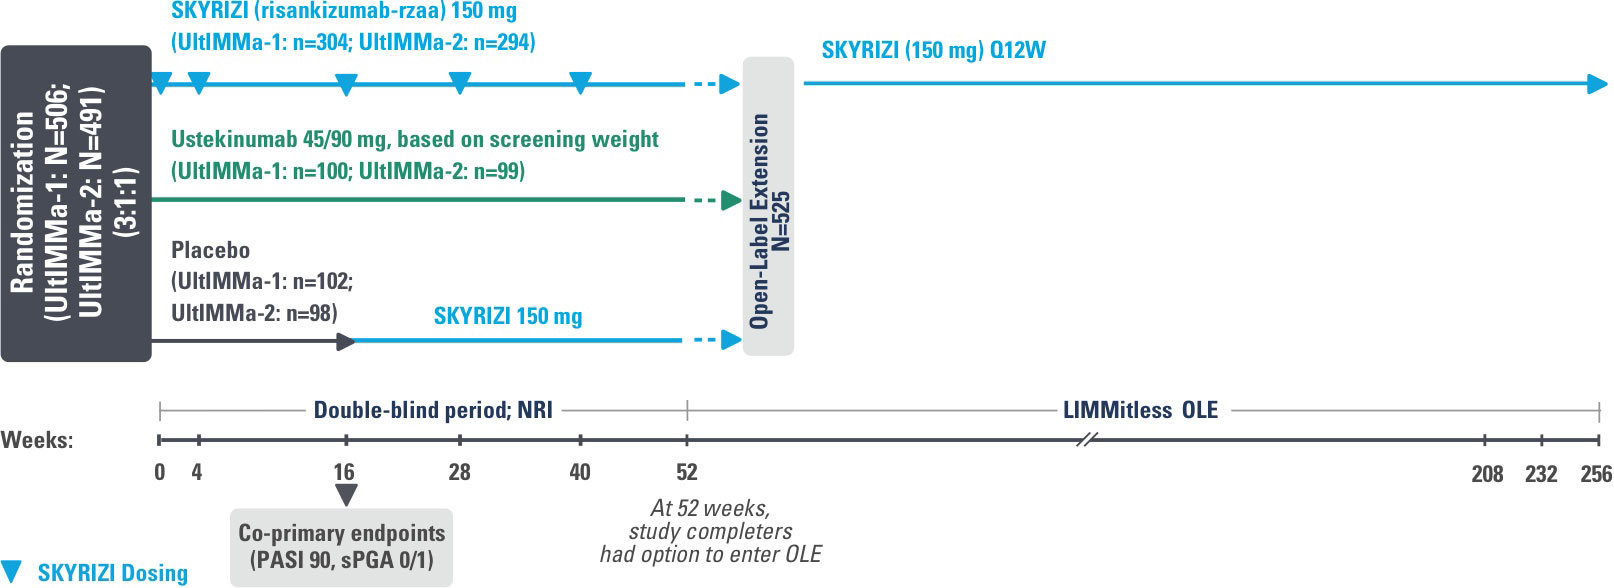 SKYRIZI® study design for UltIMMa-1 and UltIMMa-2 with LIMMitless.